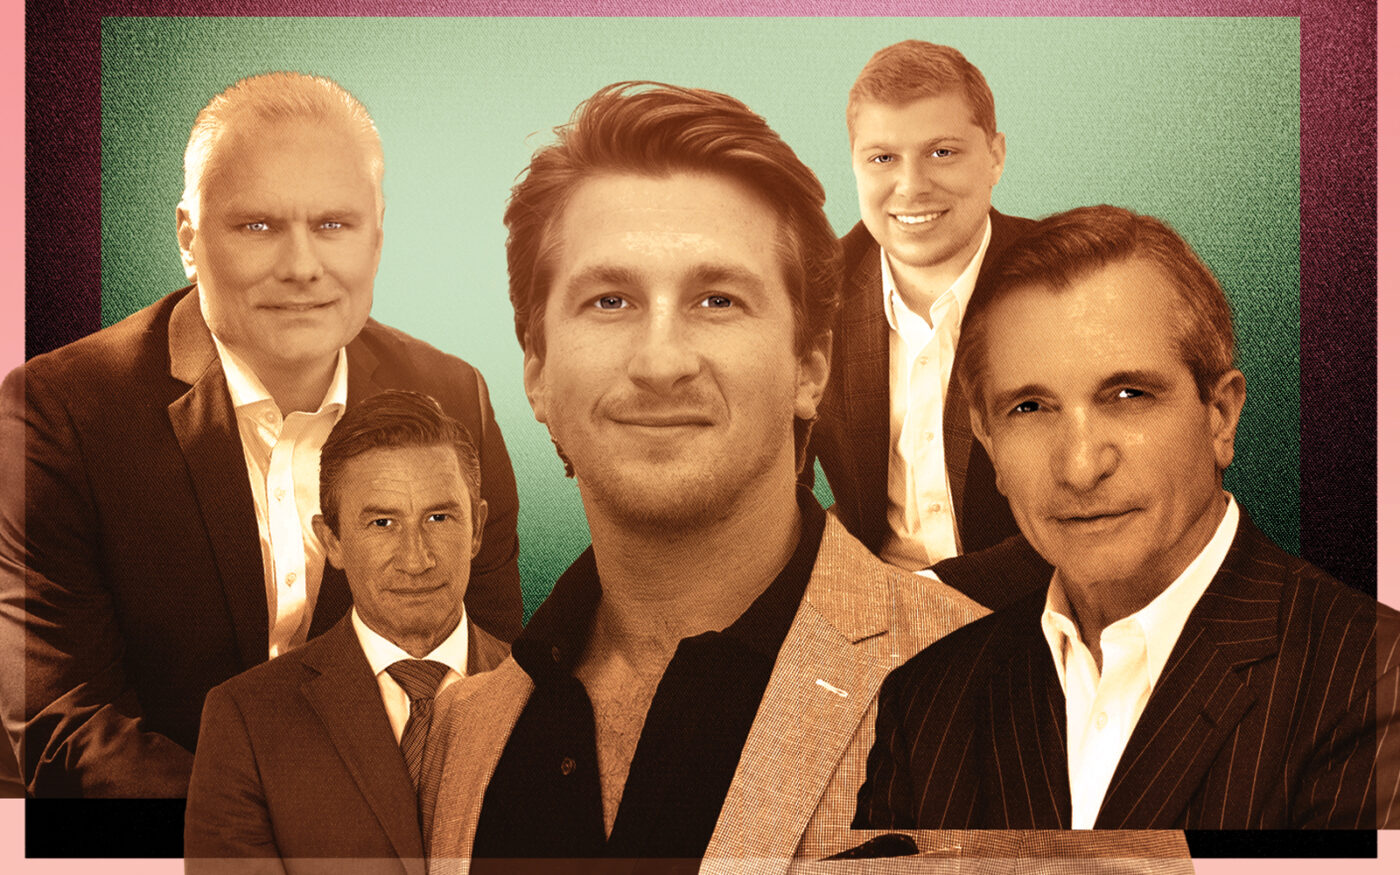 From left: Nest Seekers’ Geoff Gifkins, Modlin Group’s Chris Covert, Bespoke Real Estate’s Cody Vichinsky, Nest Seekers’ James Giugliano and Douglas Elliman’s Enzo Morabito (Photo-illustration by Kevin Rebong/The Real Deal)